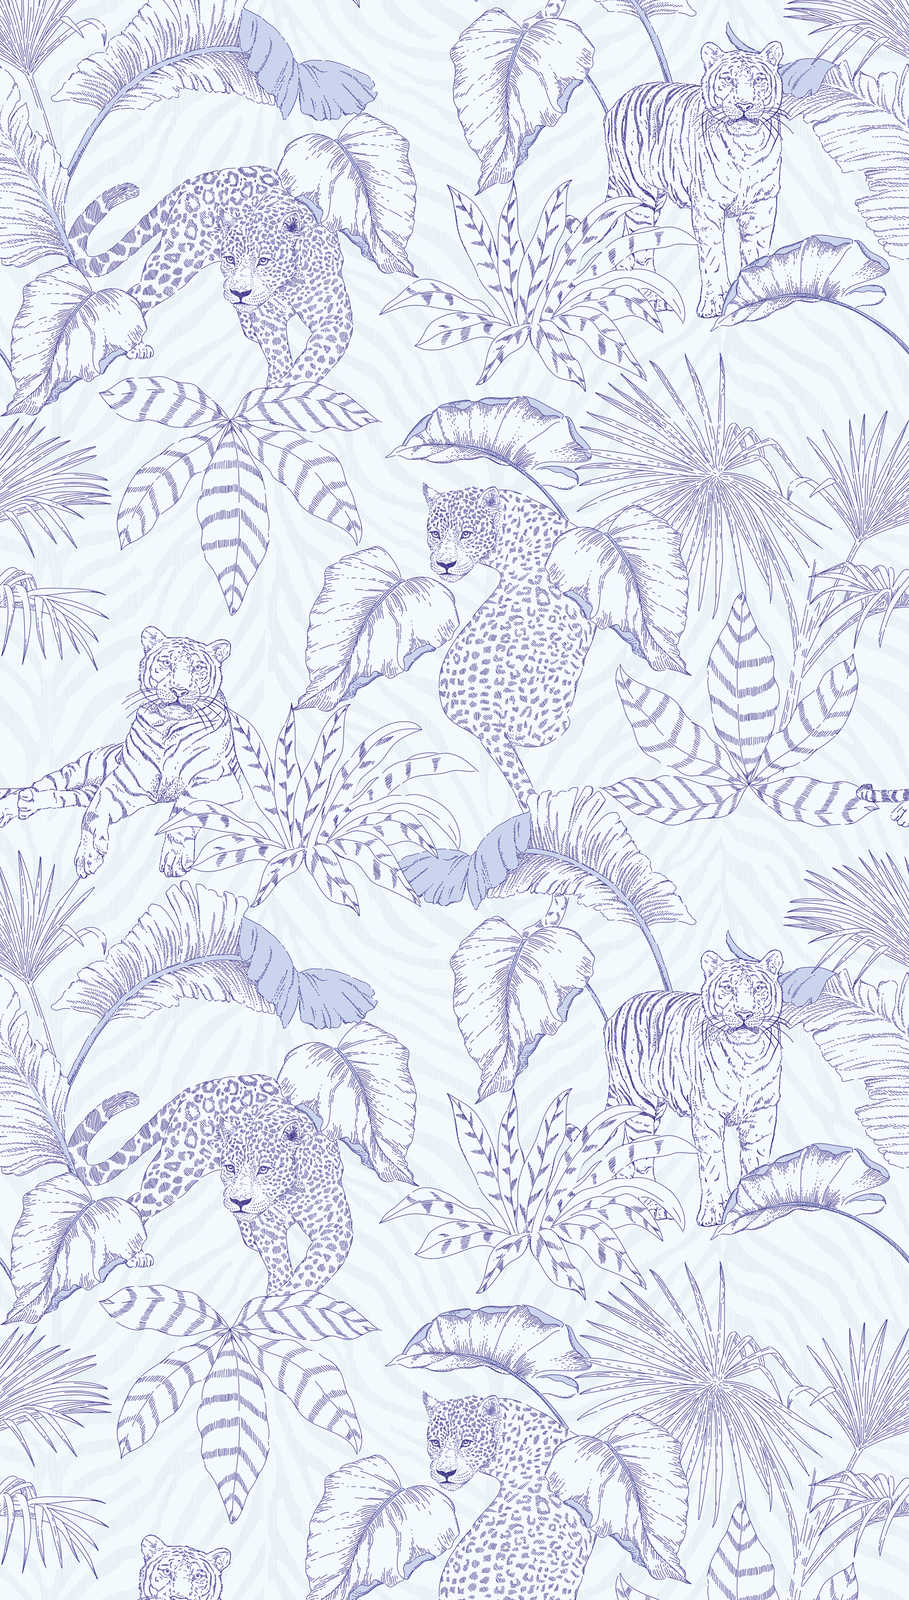             Jungle motif non-woven wallpaper with tigers and leopards - purple, white
        